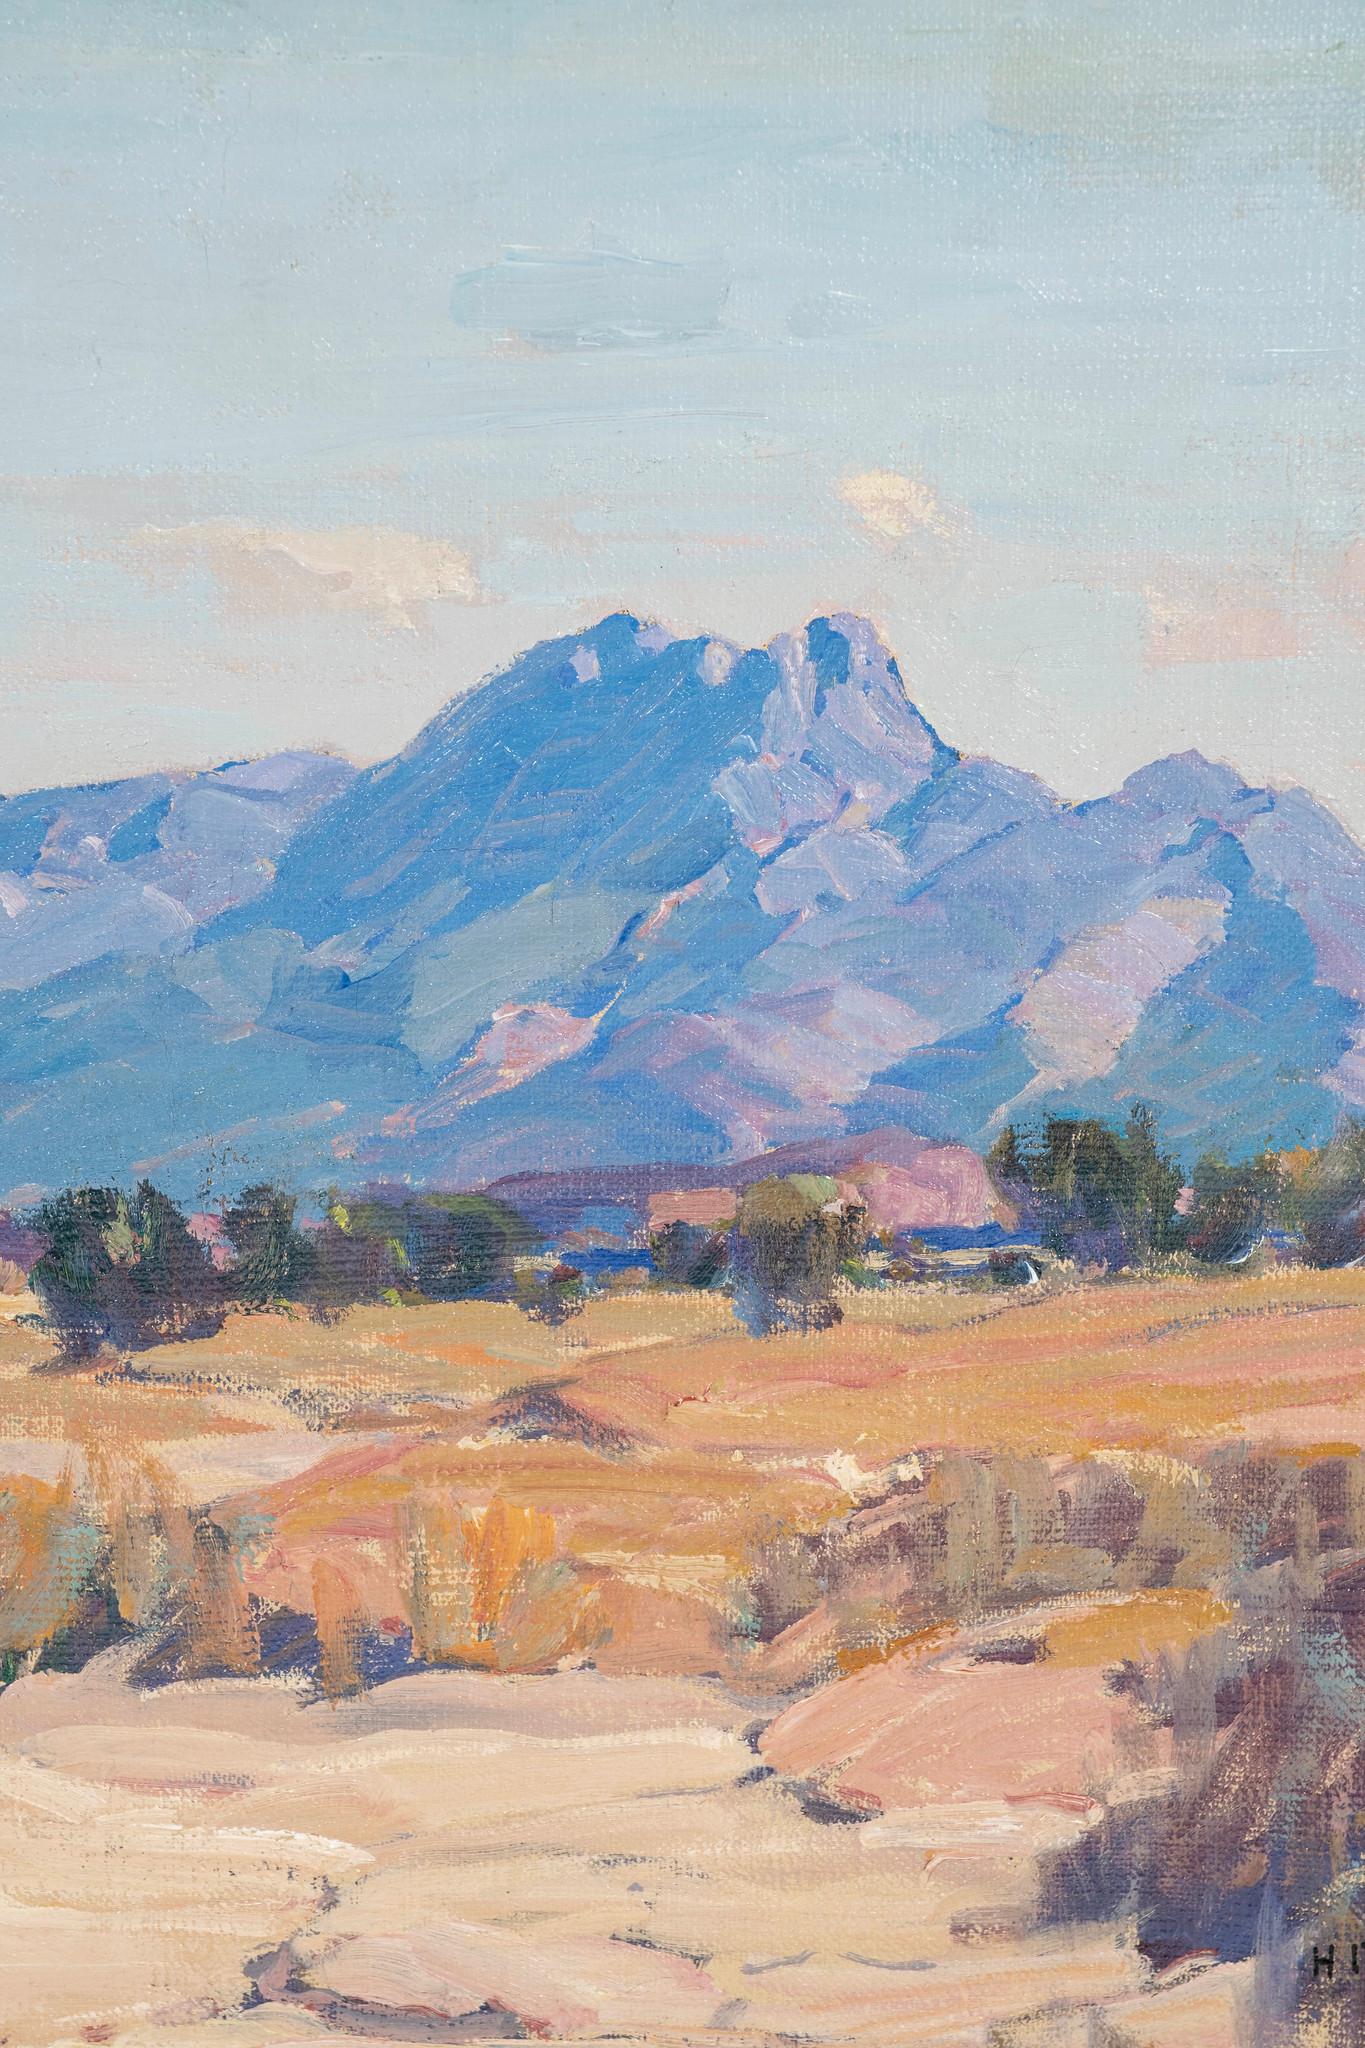 Provenance: Consigned to the gallery by private collector.  

Description: Oil painting by Hanson Puthuff, created circa 1925. He is nationally famous for his lyric interpretations of the Southern California deserts neighboring vistas prior to urban